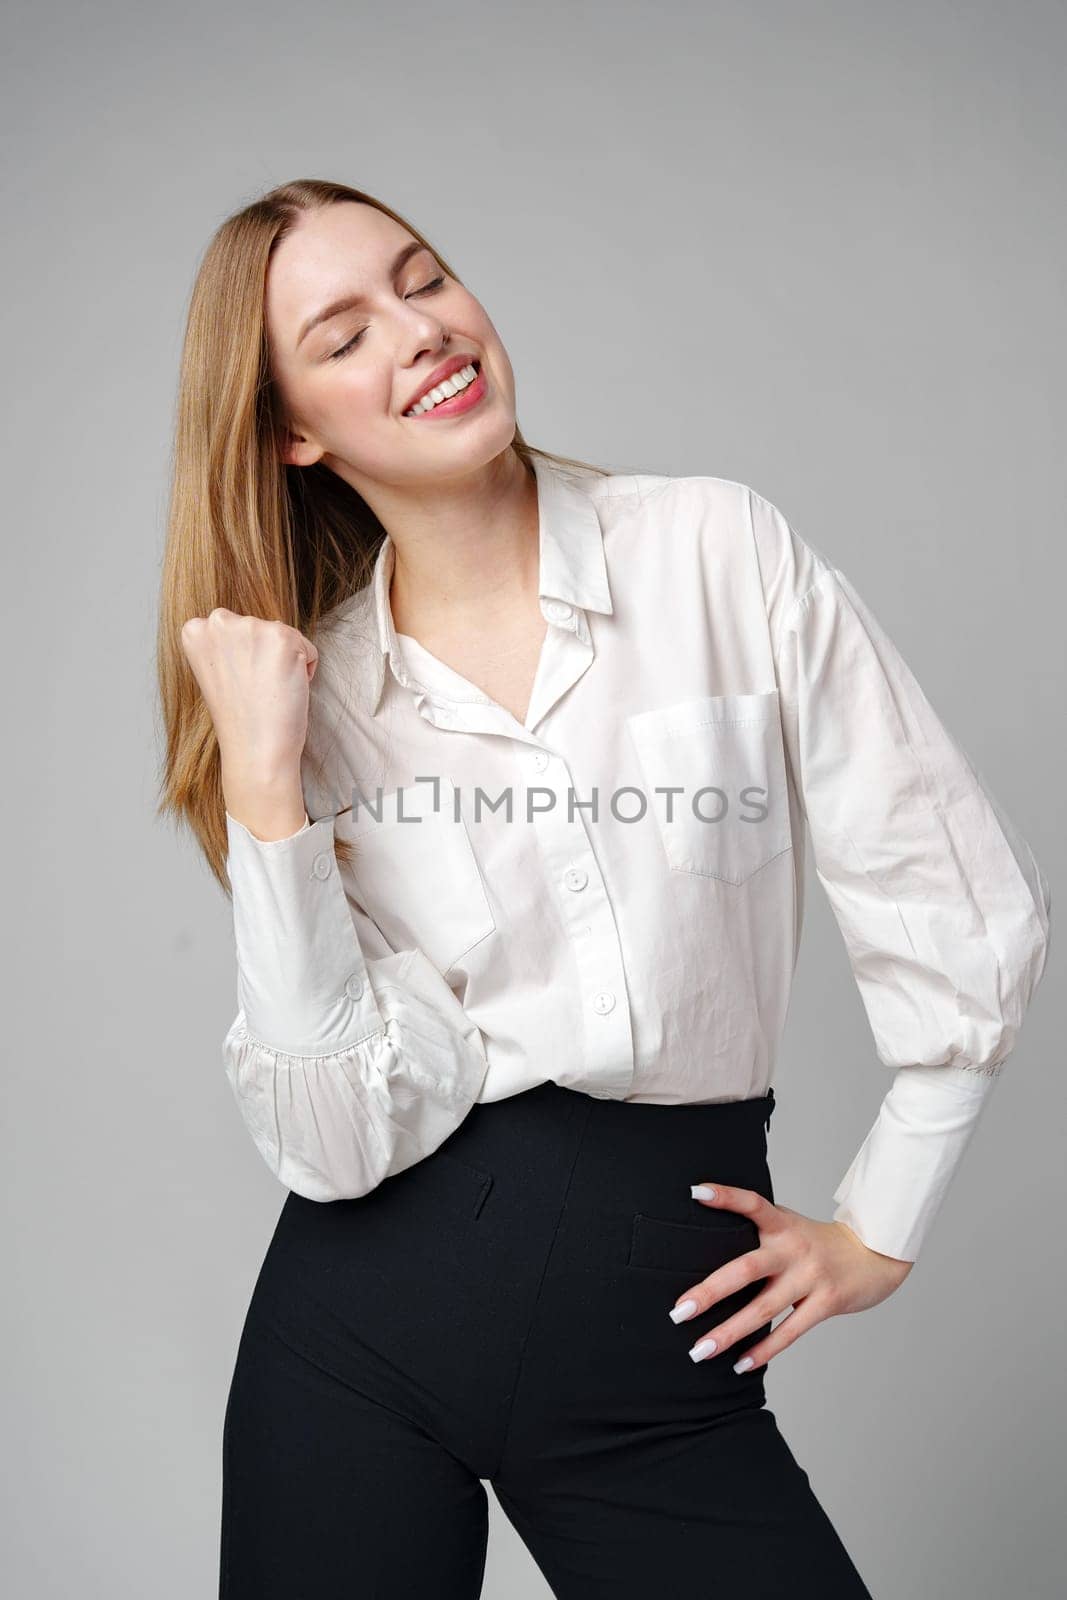 Jubilant Young Woman Celebrating a Victory With a Raised Fist in a Studio